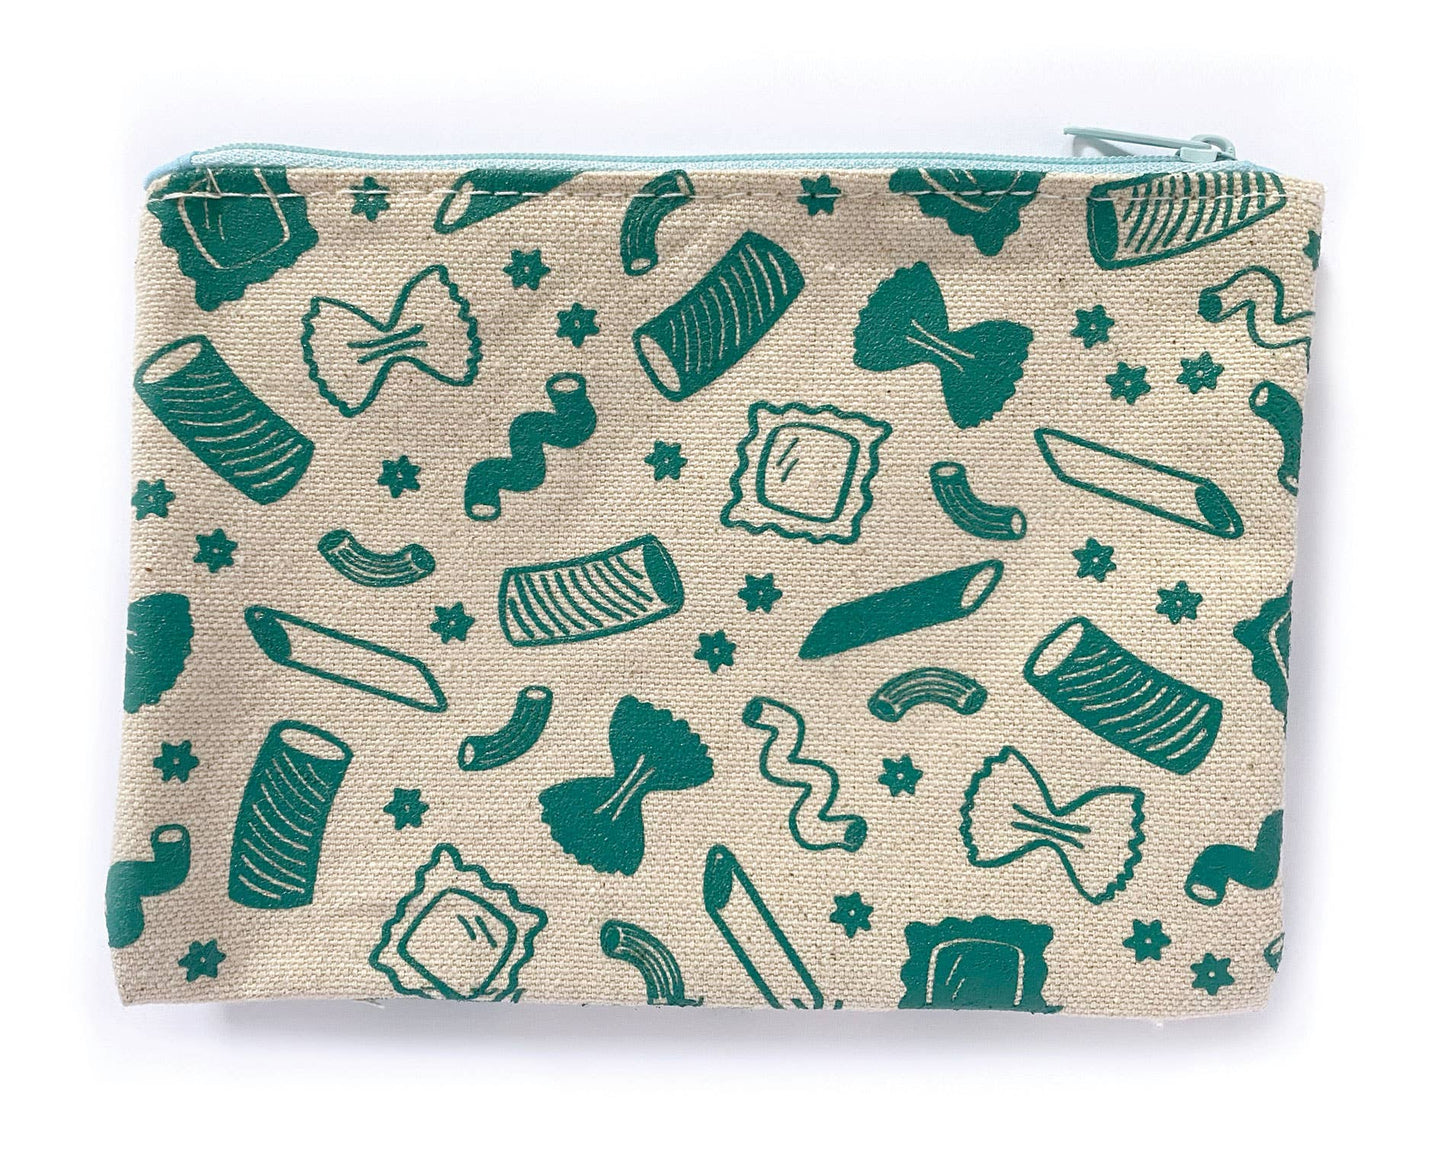 Canvas zippered pouch -- design print are various pasta noodles. Printed in a teal color, zipper is light blue. 